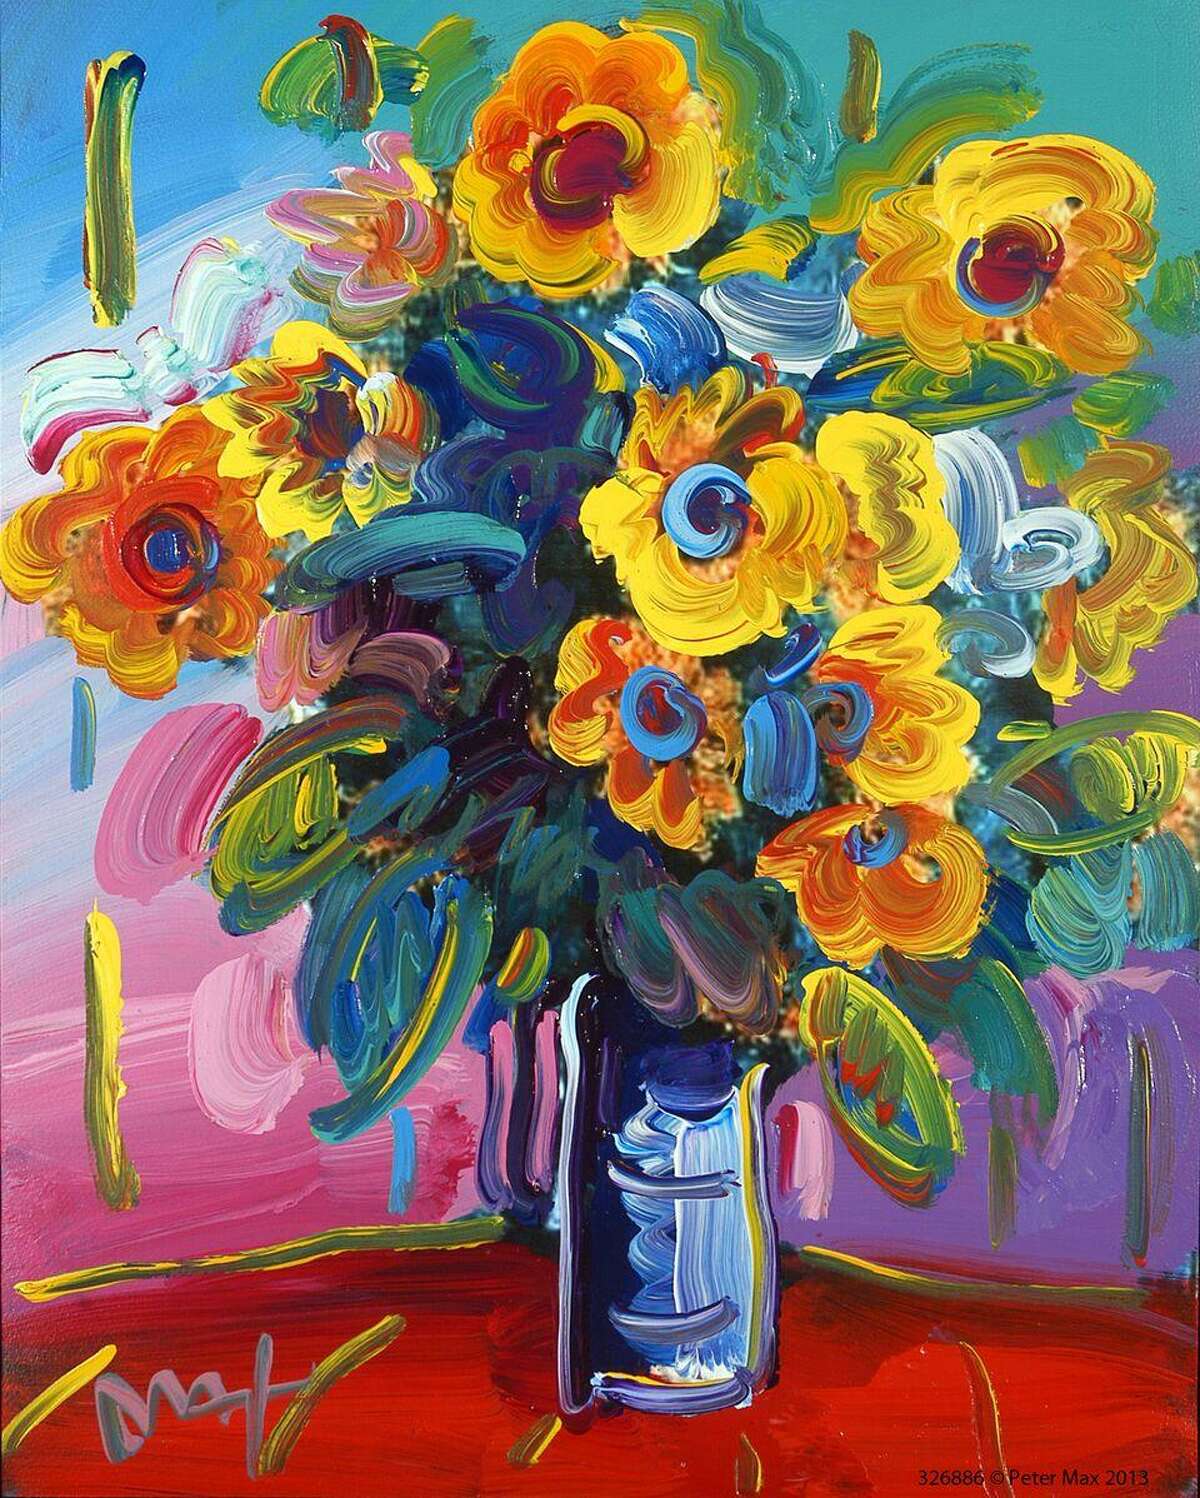 “Vase of Flowers” is by pop artist Peter Max. His works will be on view Oct. 13-22 at the C. Parker Gallery in Greenwich, and the artist will be celebrated at two public events during the run.